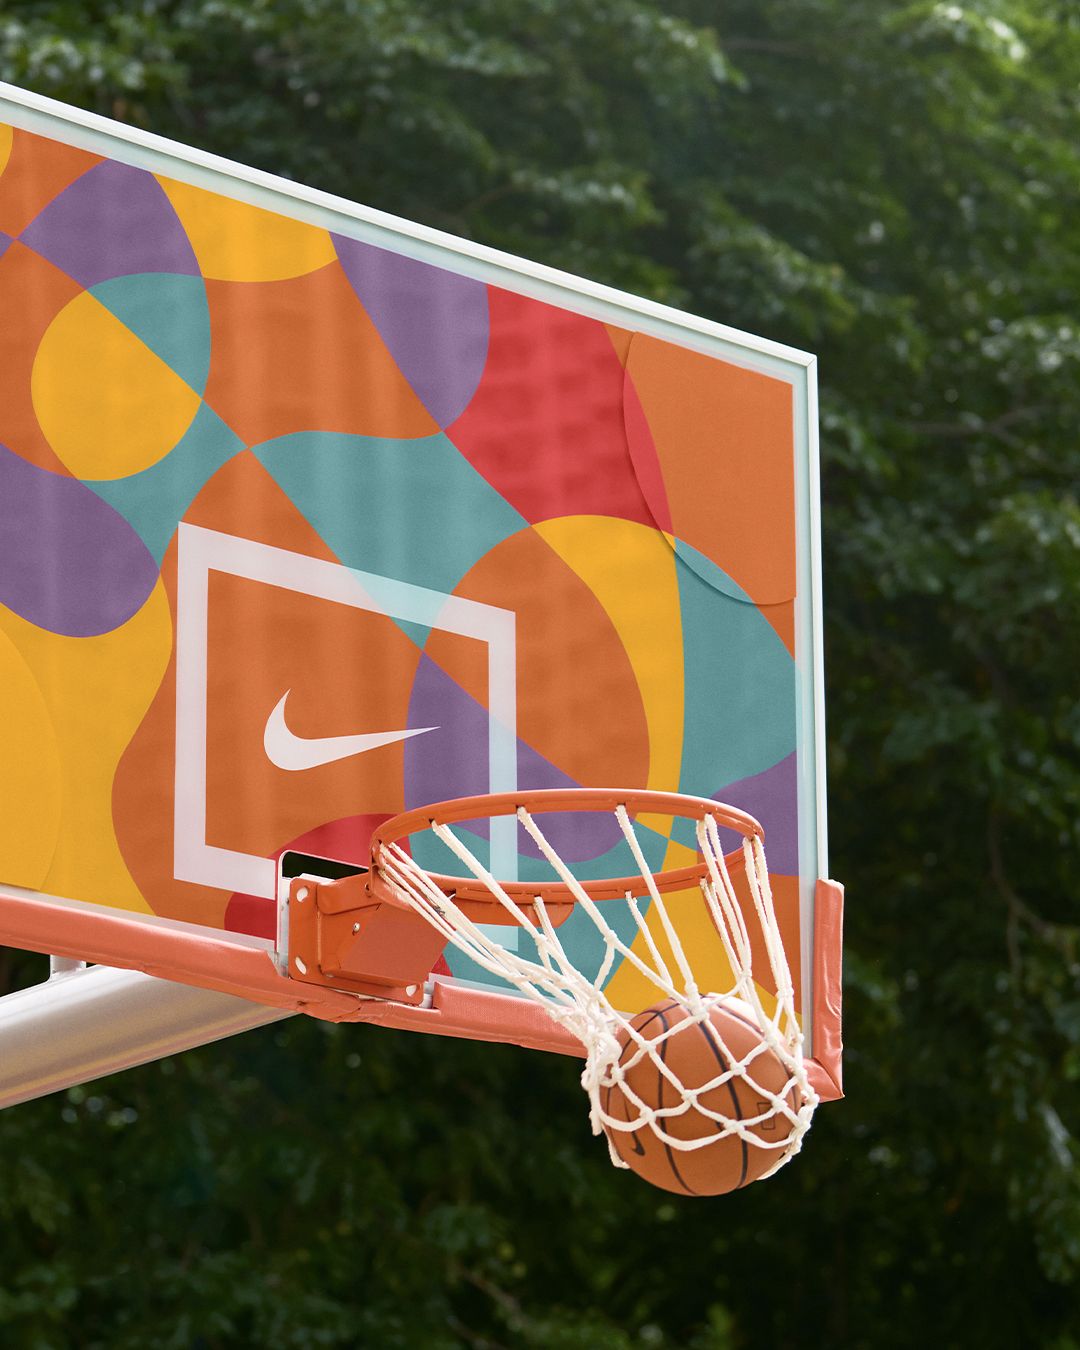 A colorful basketball hoop with a ball in the basket. - Basketball